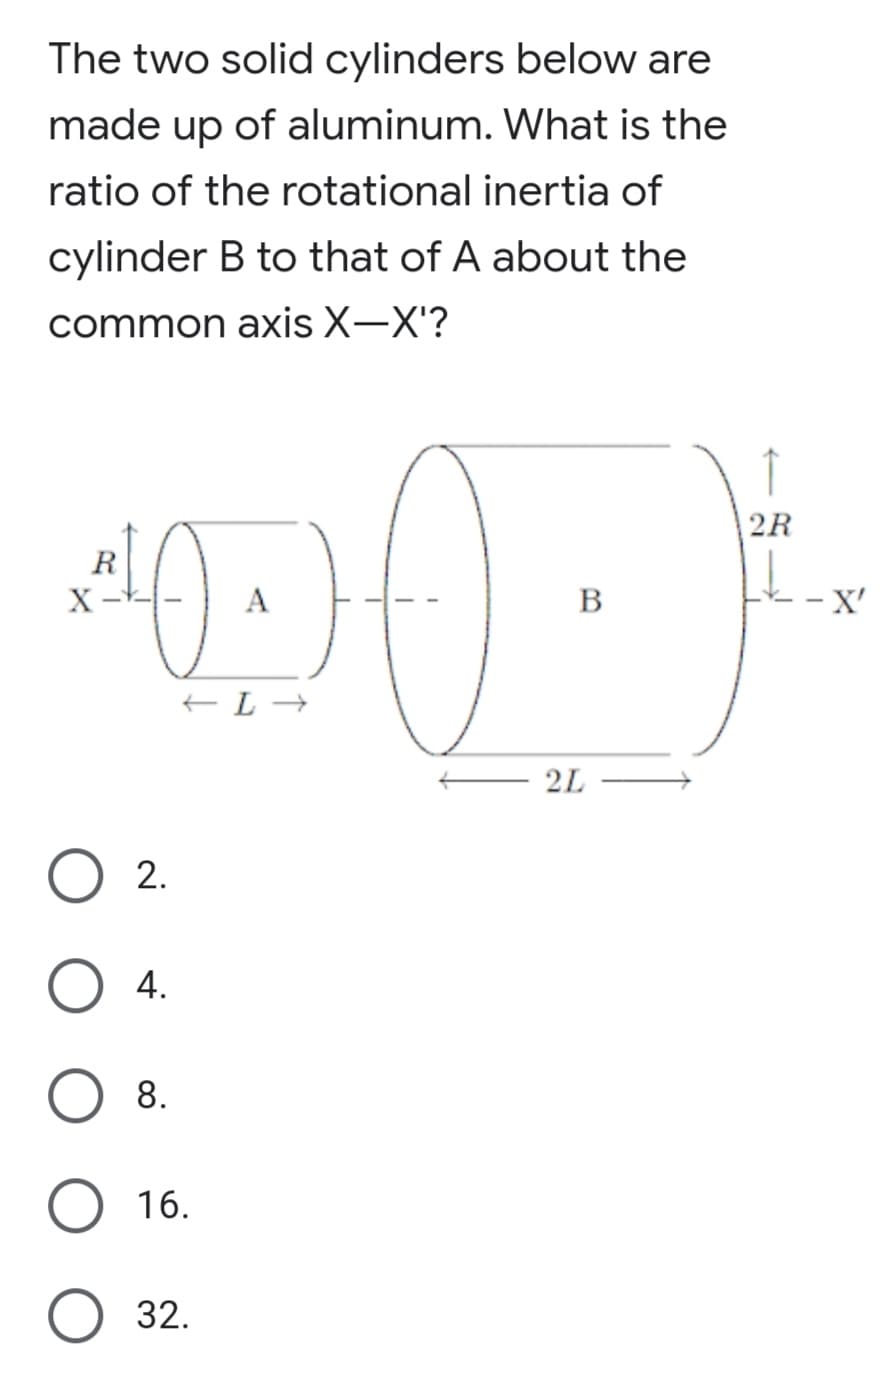 The two solid cylinders below are
made up of aluminum. What is the
ratio of the rotational inertia of
cylinder B to that of A about the
common axis X-X'?
↑
2R
R
B
X'
2L
2.
4.
8.
O 16.
O 32.
